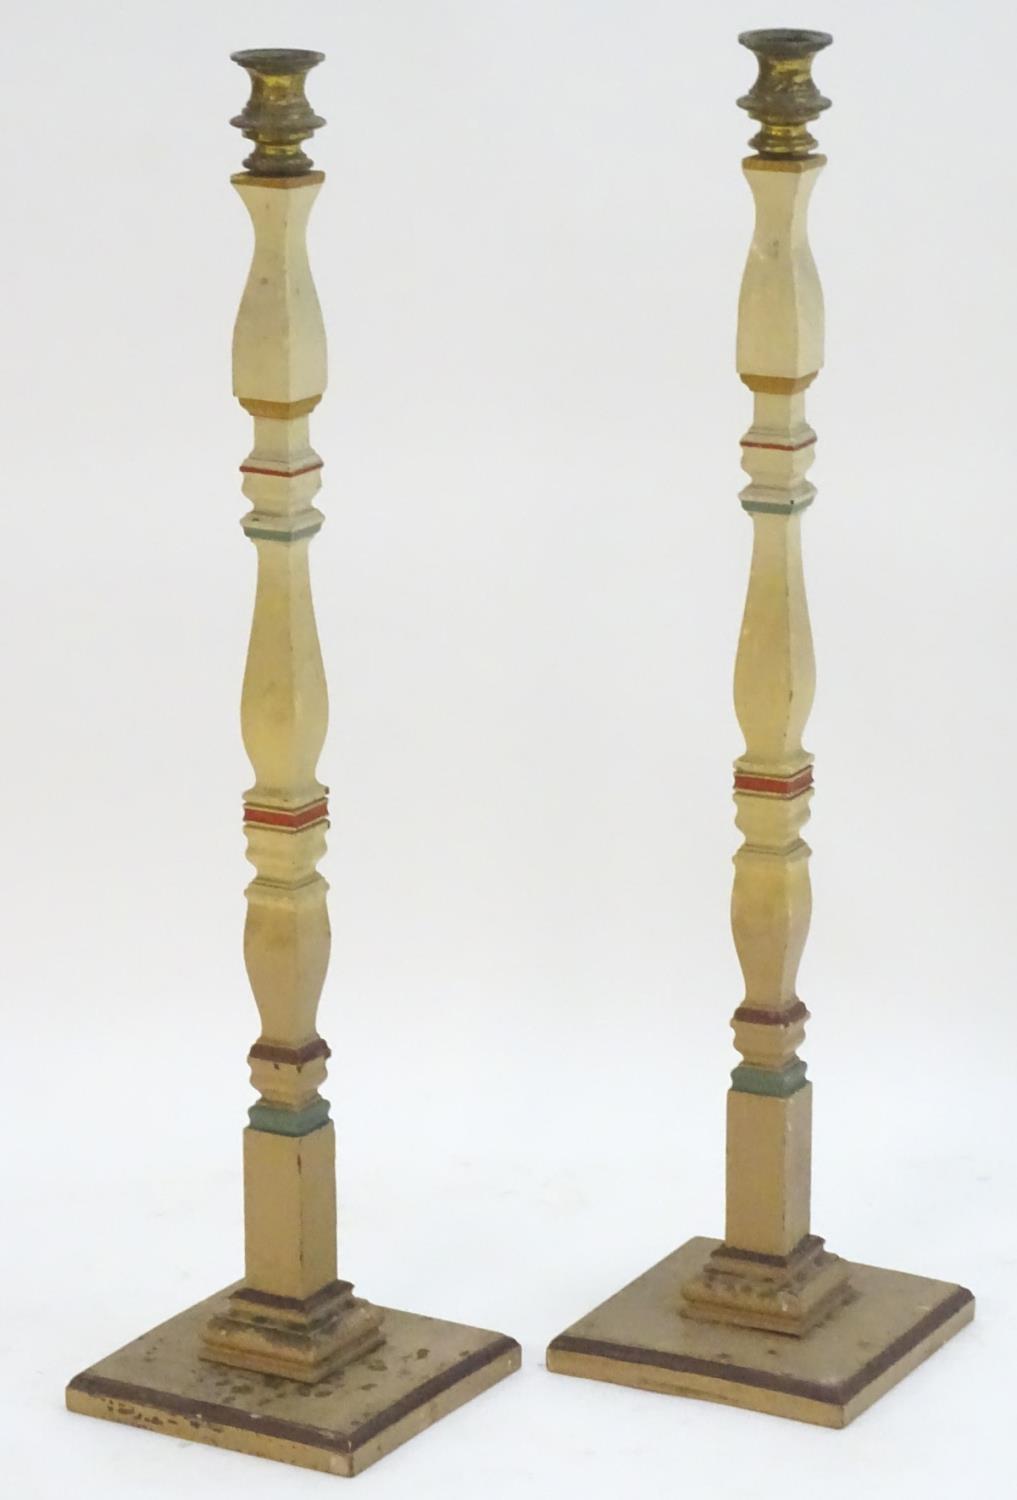 A pair of 20thC tall squared based candlesticks of carved wooden form with painted decoration and - Image 15 of 16